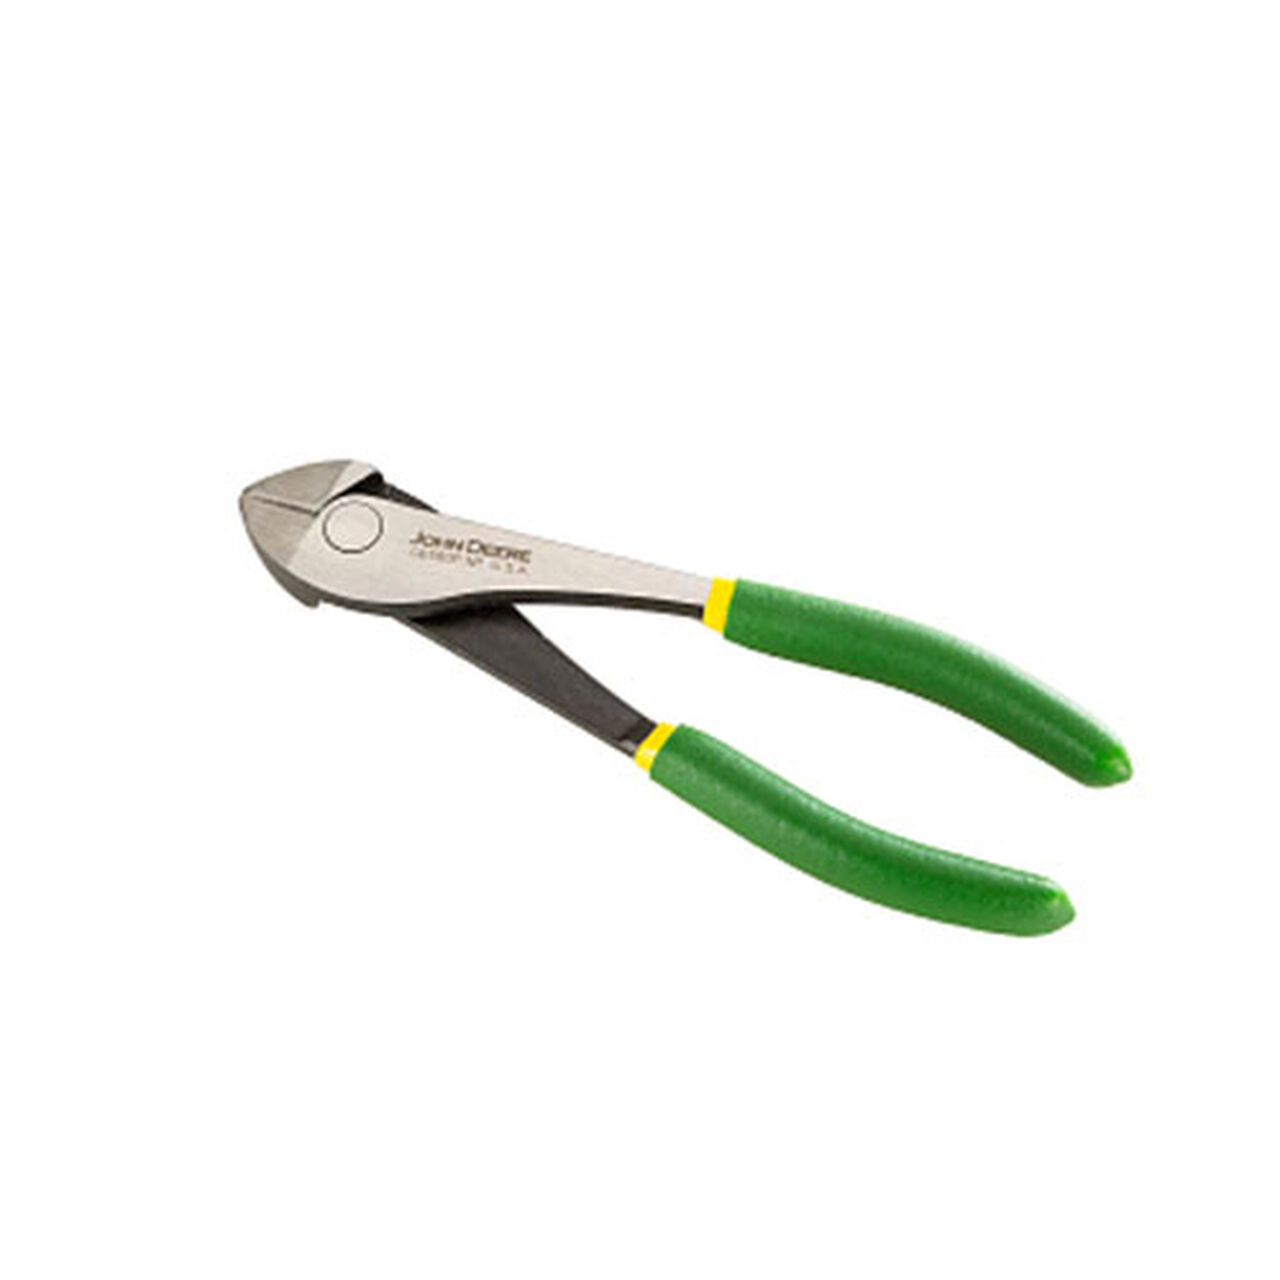 7" Diagonal Plier - TY27357,  image number 0